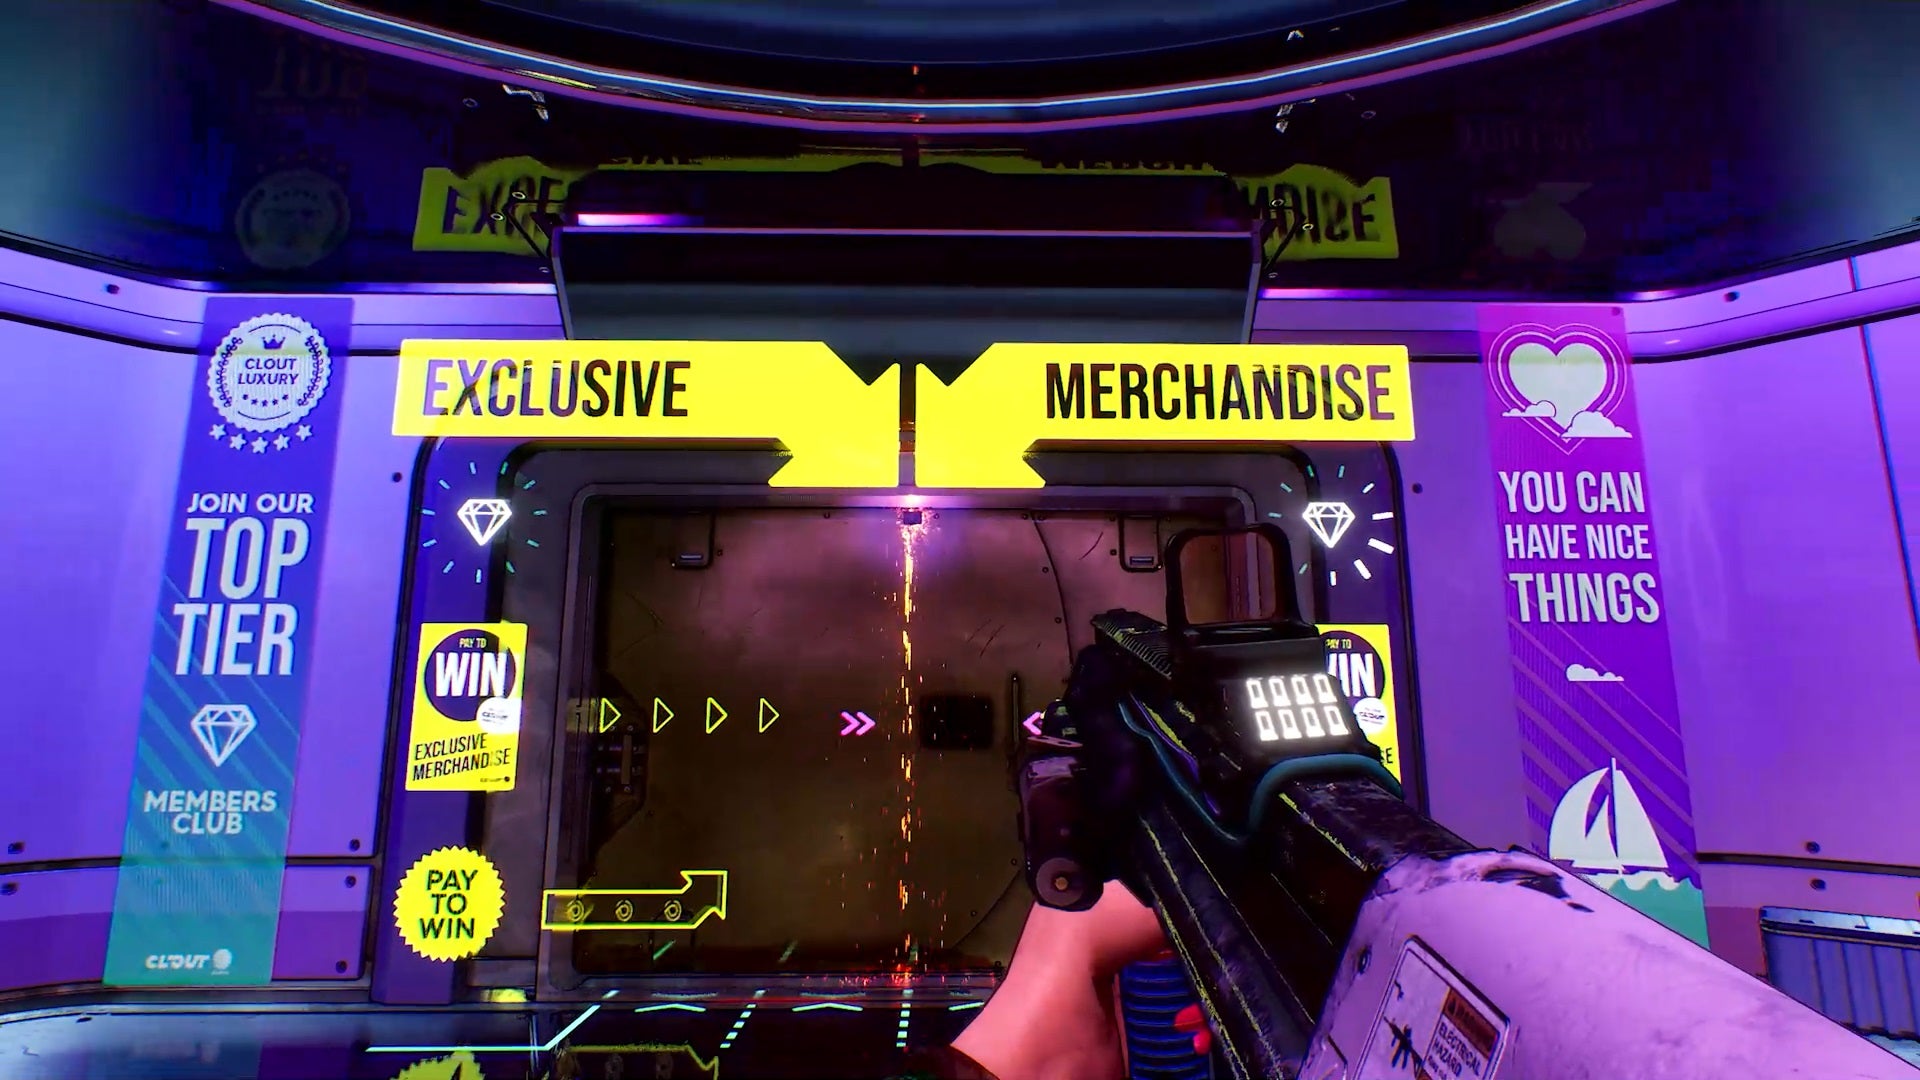 A purple-hued shot of a character holding a gun facing what look like glass sliding doors with huge "exclusive merchandise" labels above them. It's a shot that exudes garish capitalism.